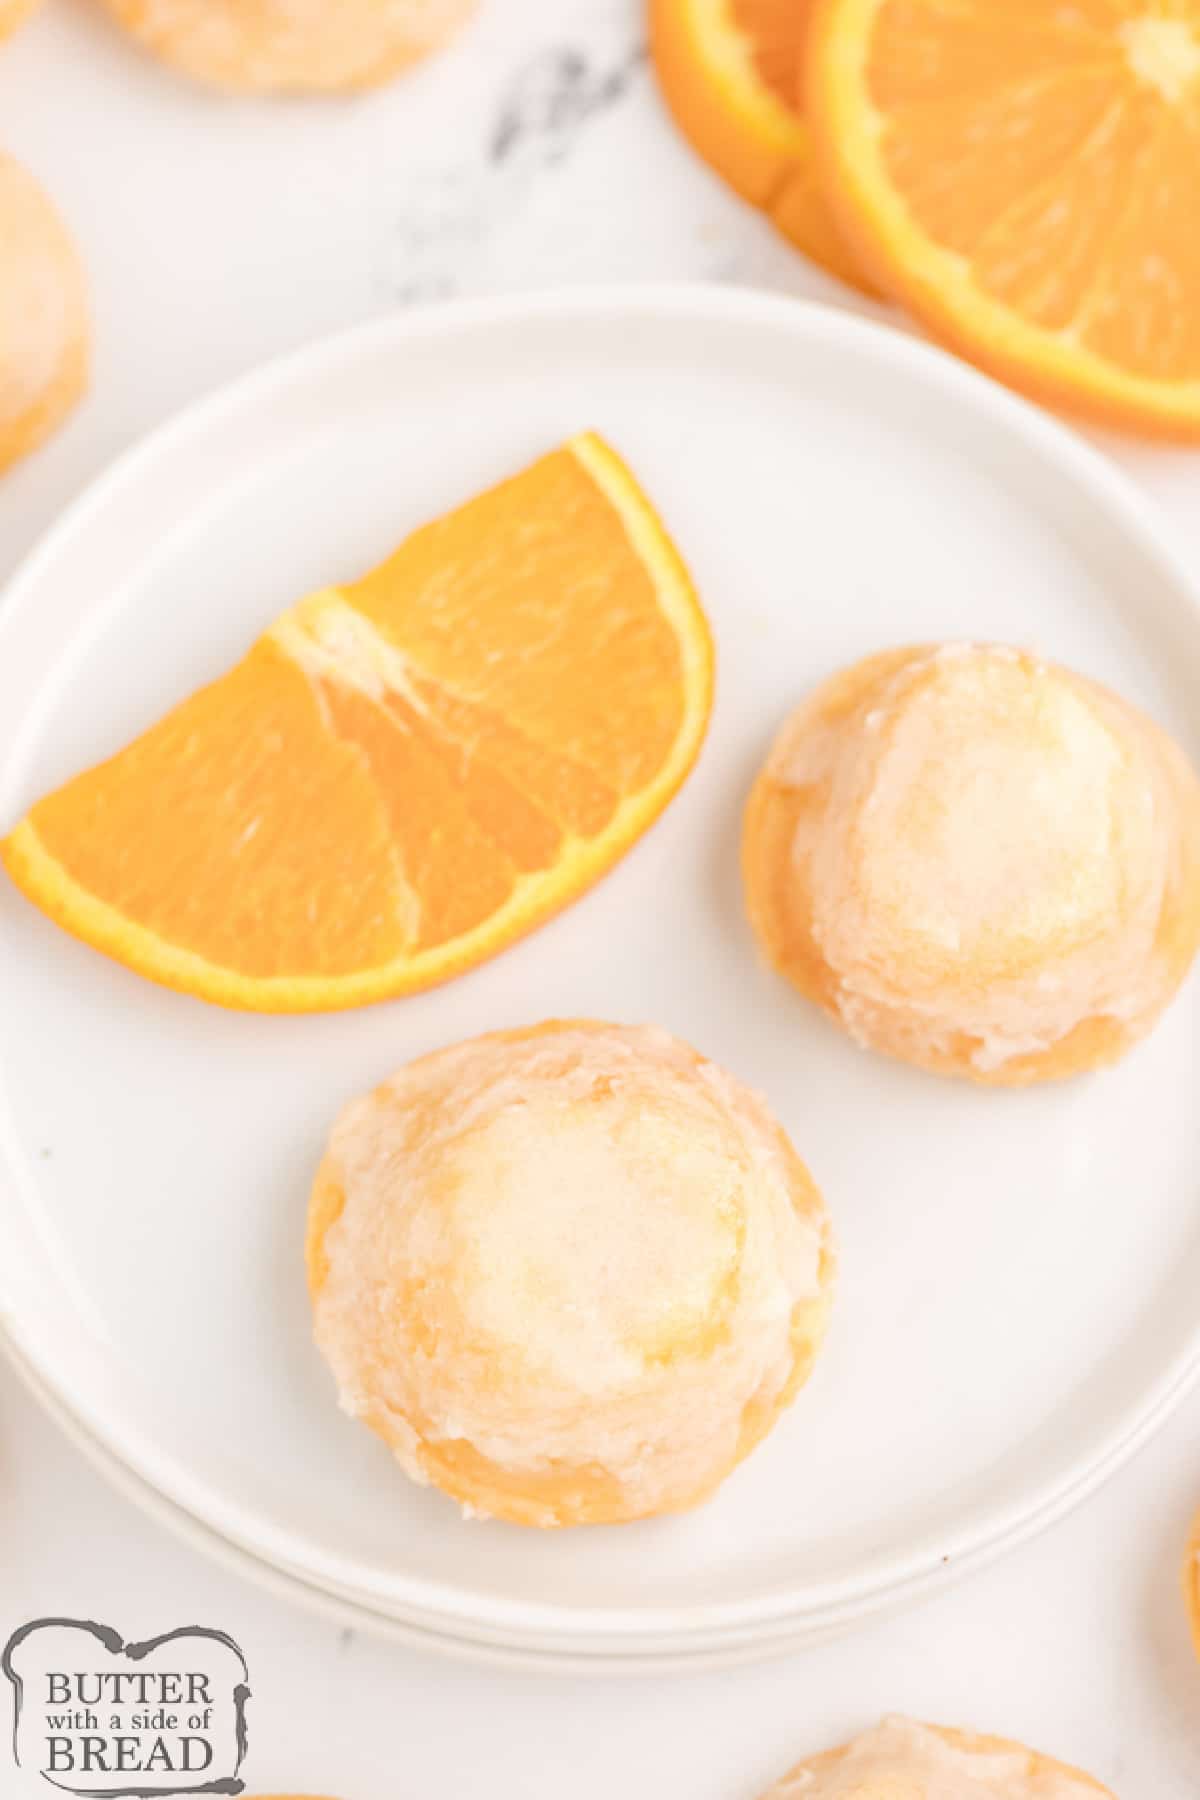 Orange Creamsicle Cake Bites are delicious bite-sized treats that start with a cake mix! The easy orange glaze soaks into the bottoms, making these little cupcakes even more incredible.